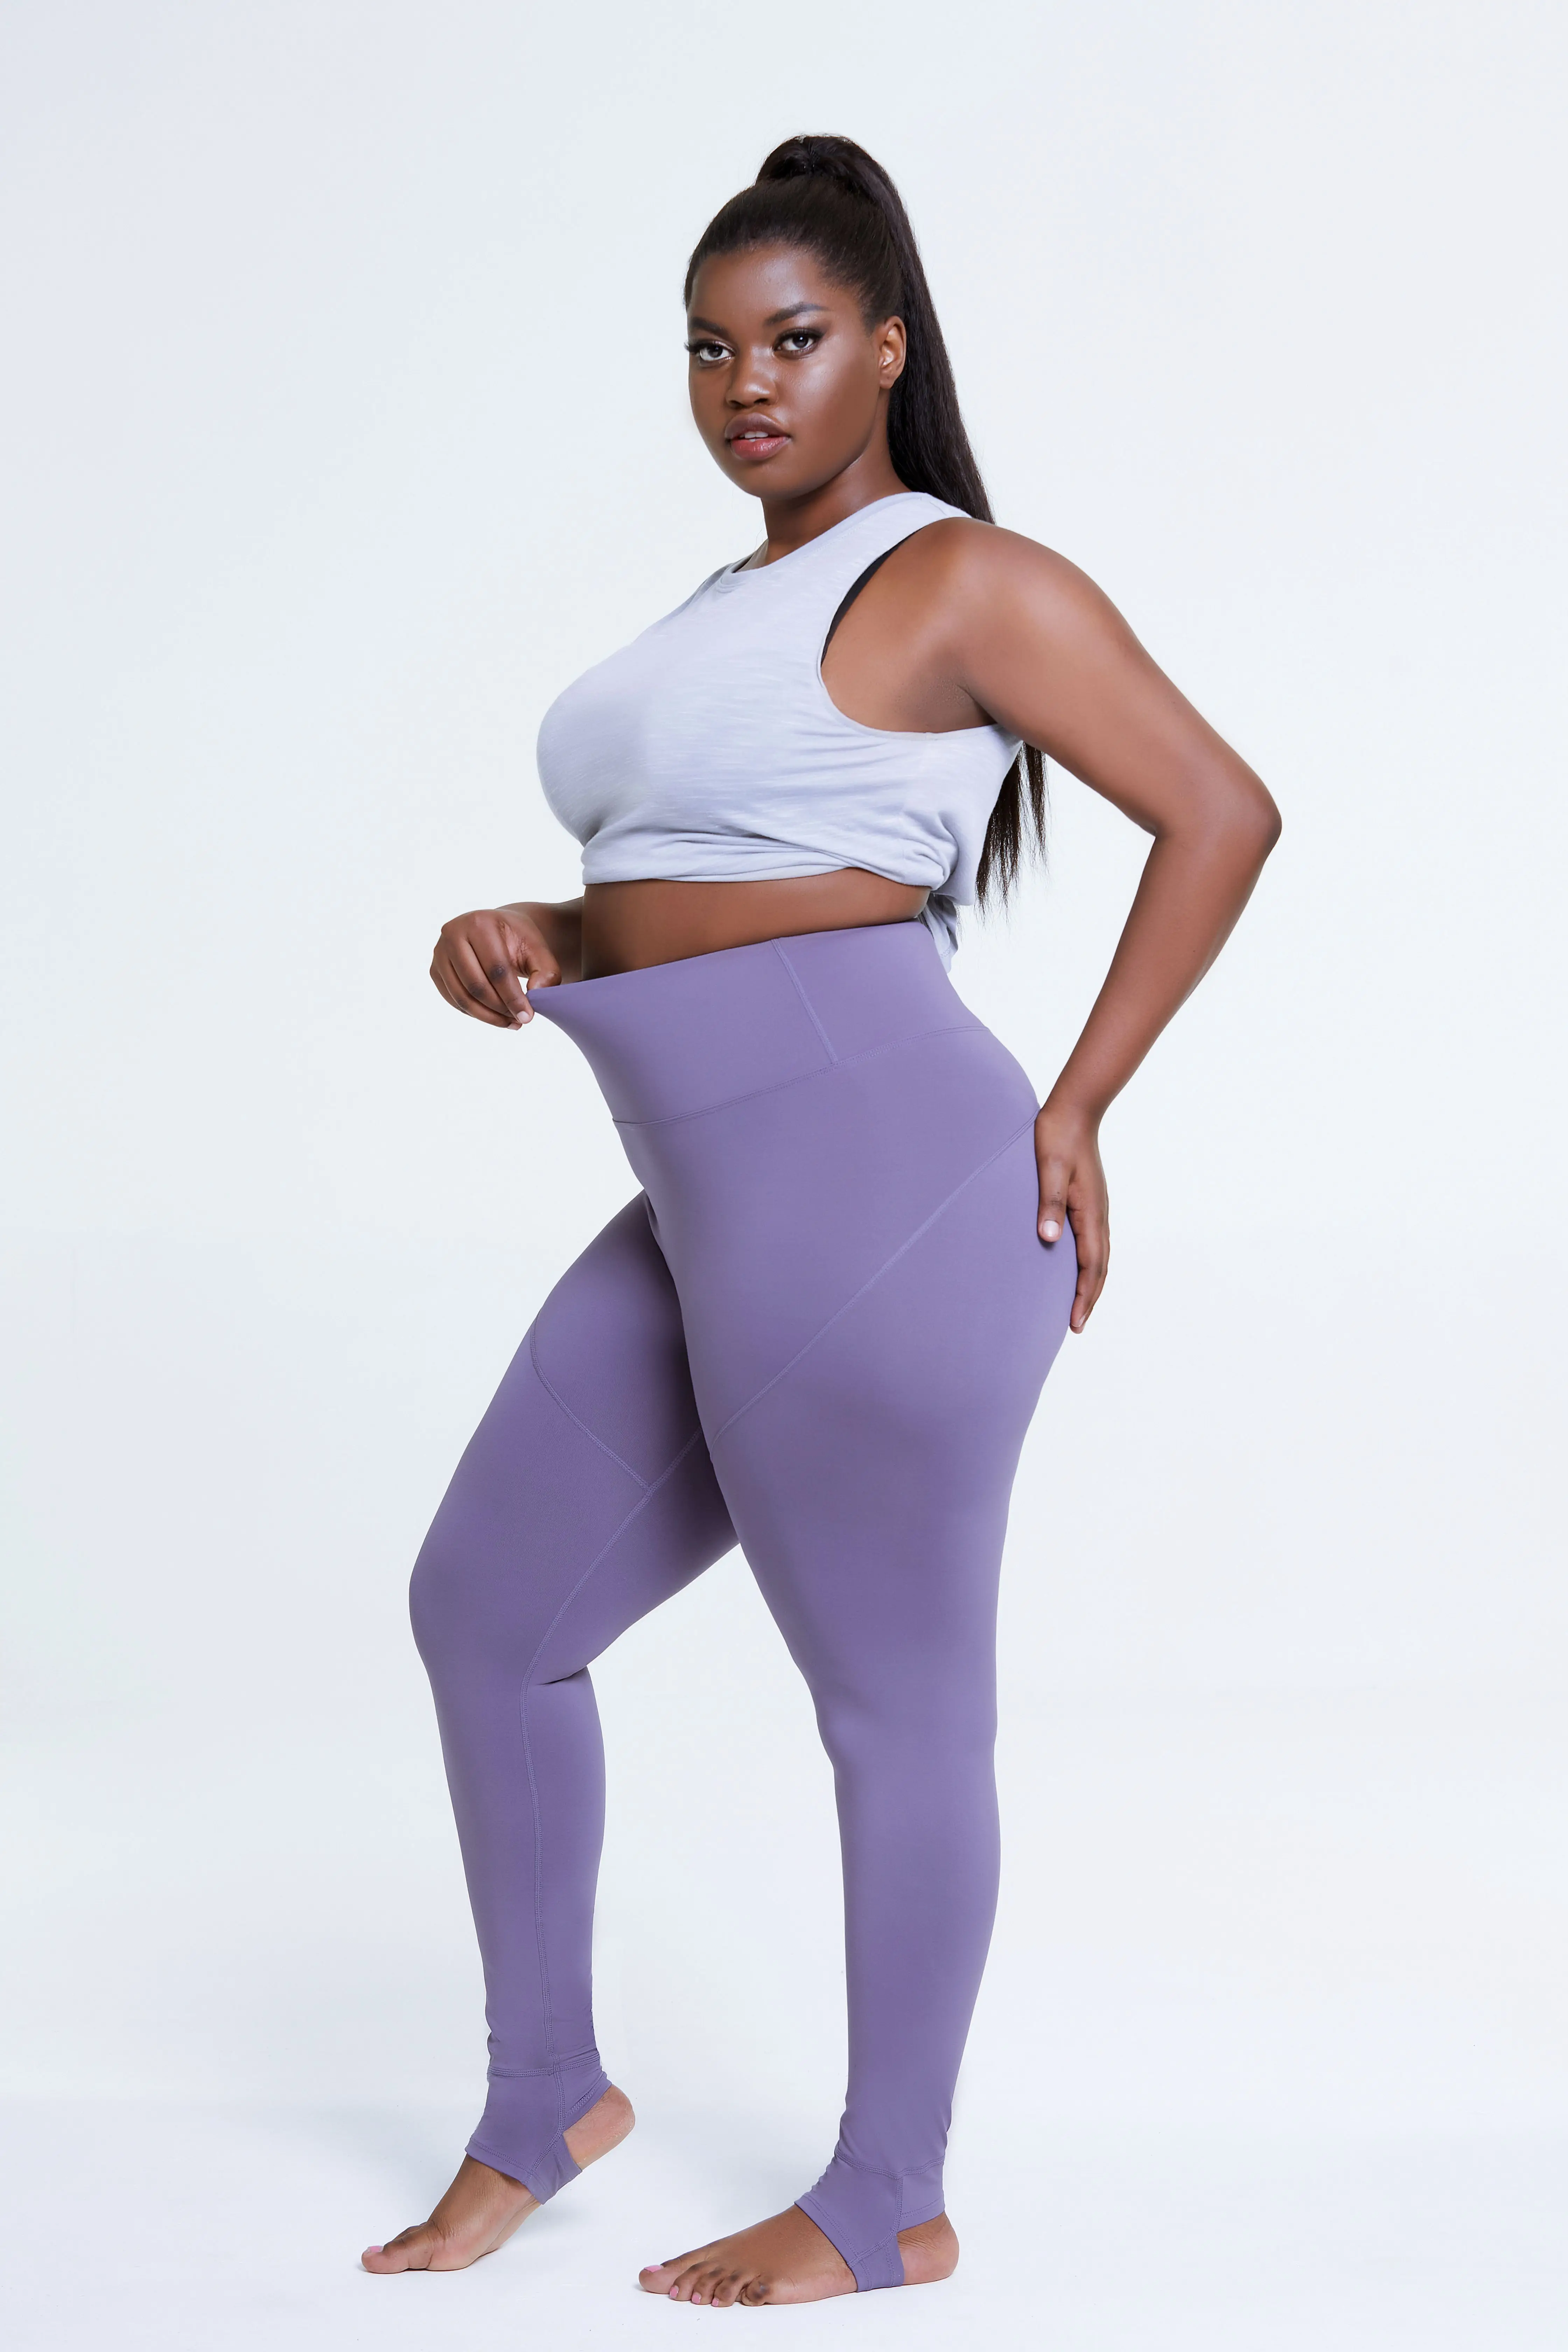 4480px x 6720px - Women Plus Size Naked Feeling Yoga Leggings Xxxxl No Camel Toe High Waist  Step-on Fitness Yoga Pants Leggings For Fat Lady - Buy 2021 New Fashion  High Quality Activewear Plus Size Fitness